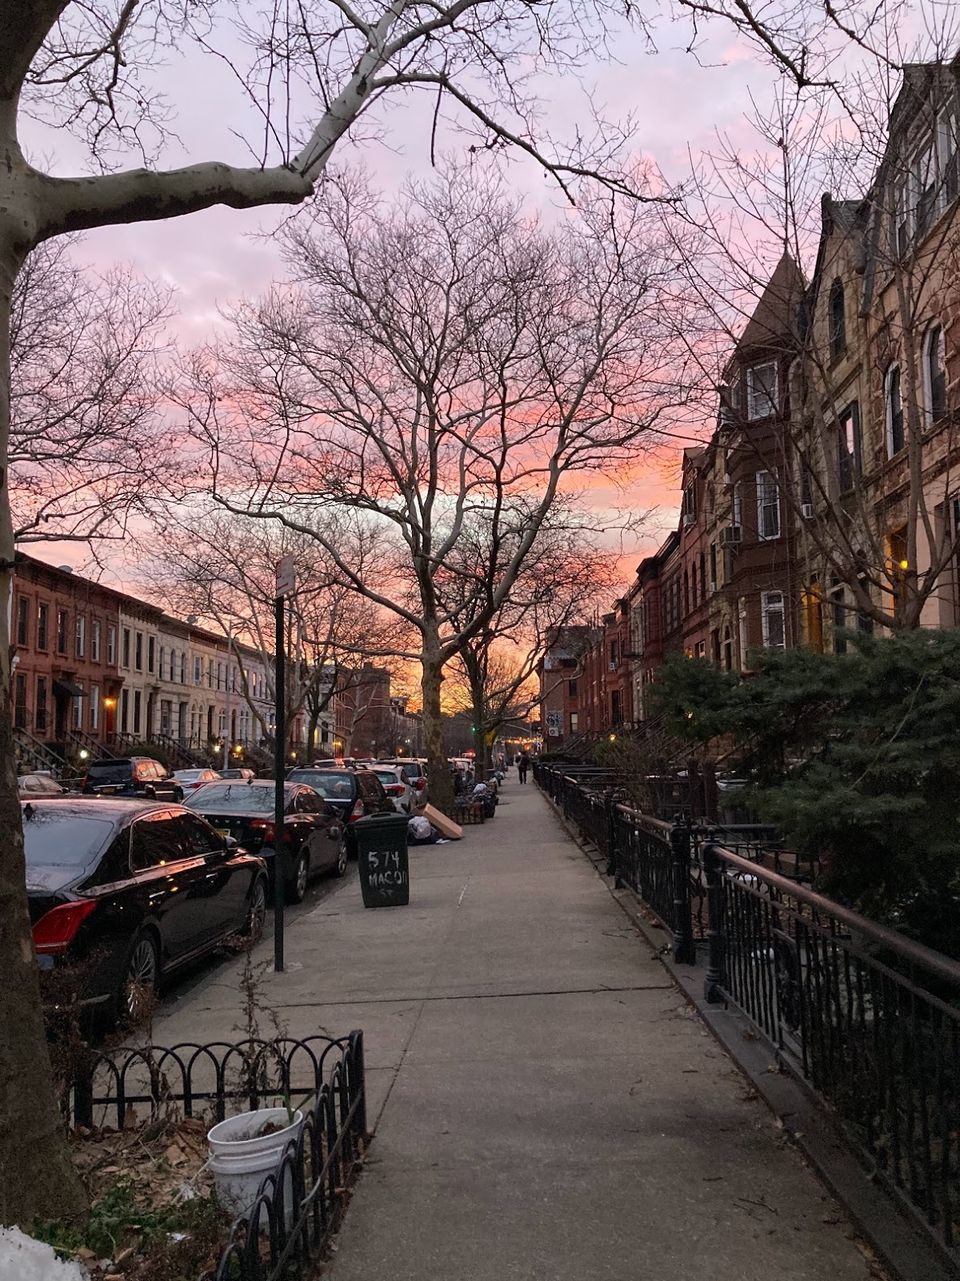 The sun rises over Brooklyn brownstones. Trash awaits pick-up on the curb, and streetlights still pinprick the block. 